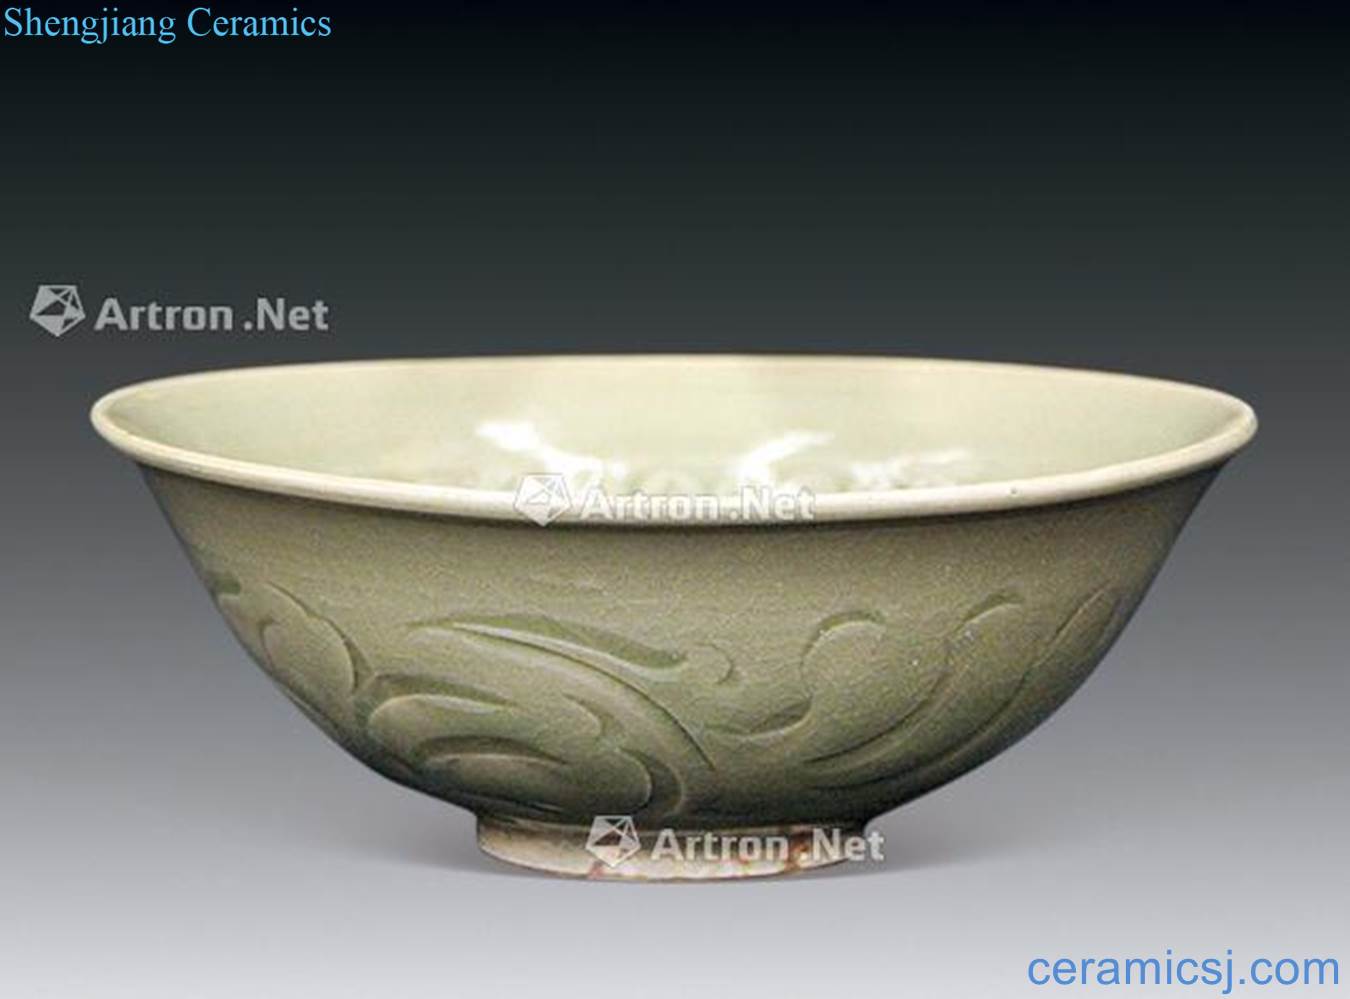 Jin yao state 2 face engrave peony bowl